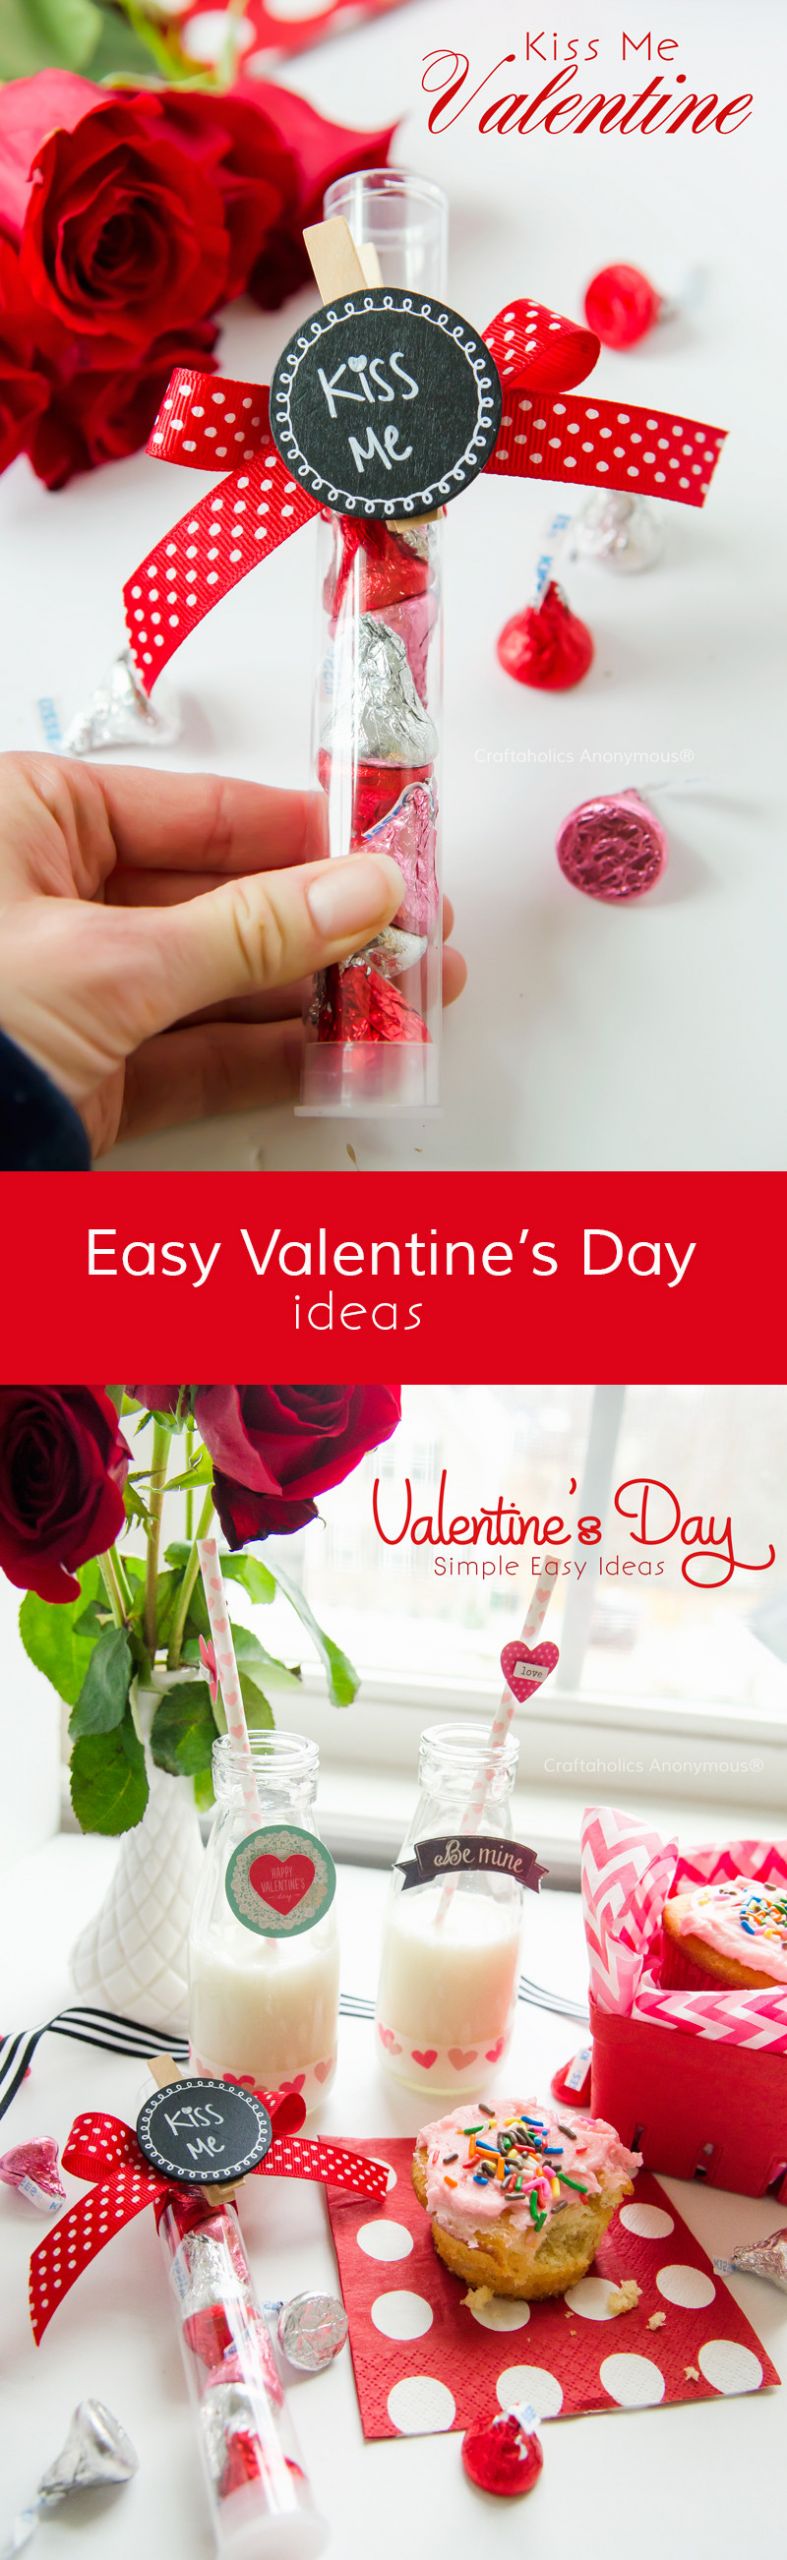 Quick Valentines Day Gifts
 Craftaholics Anonymous